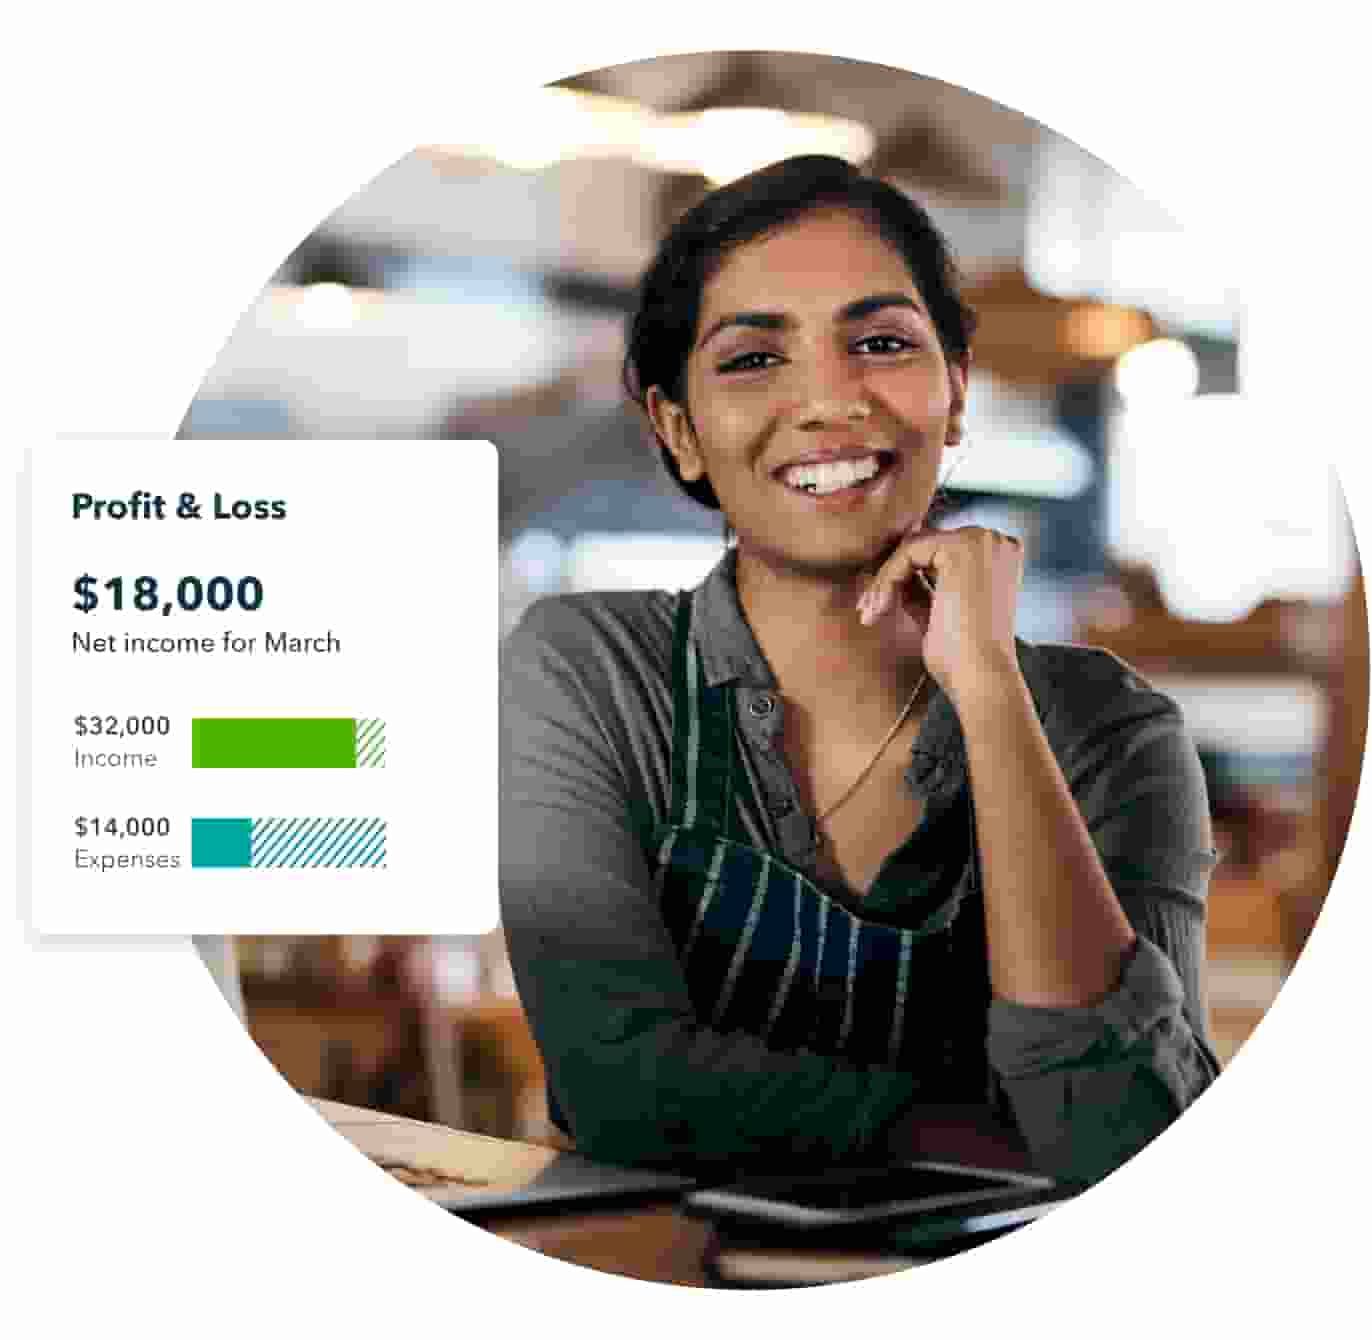 Smiling business woman with hand on chin with overlay of Profit & Loss report from QuickBooks.